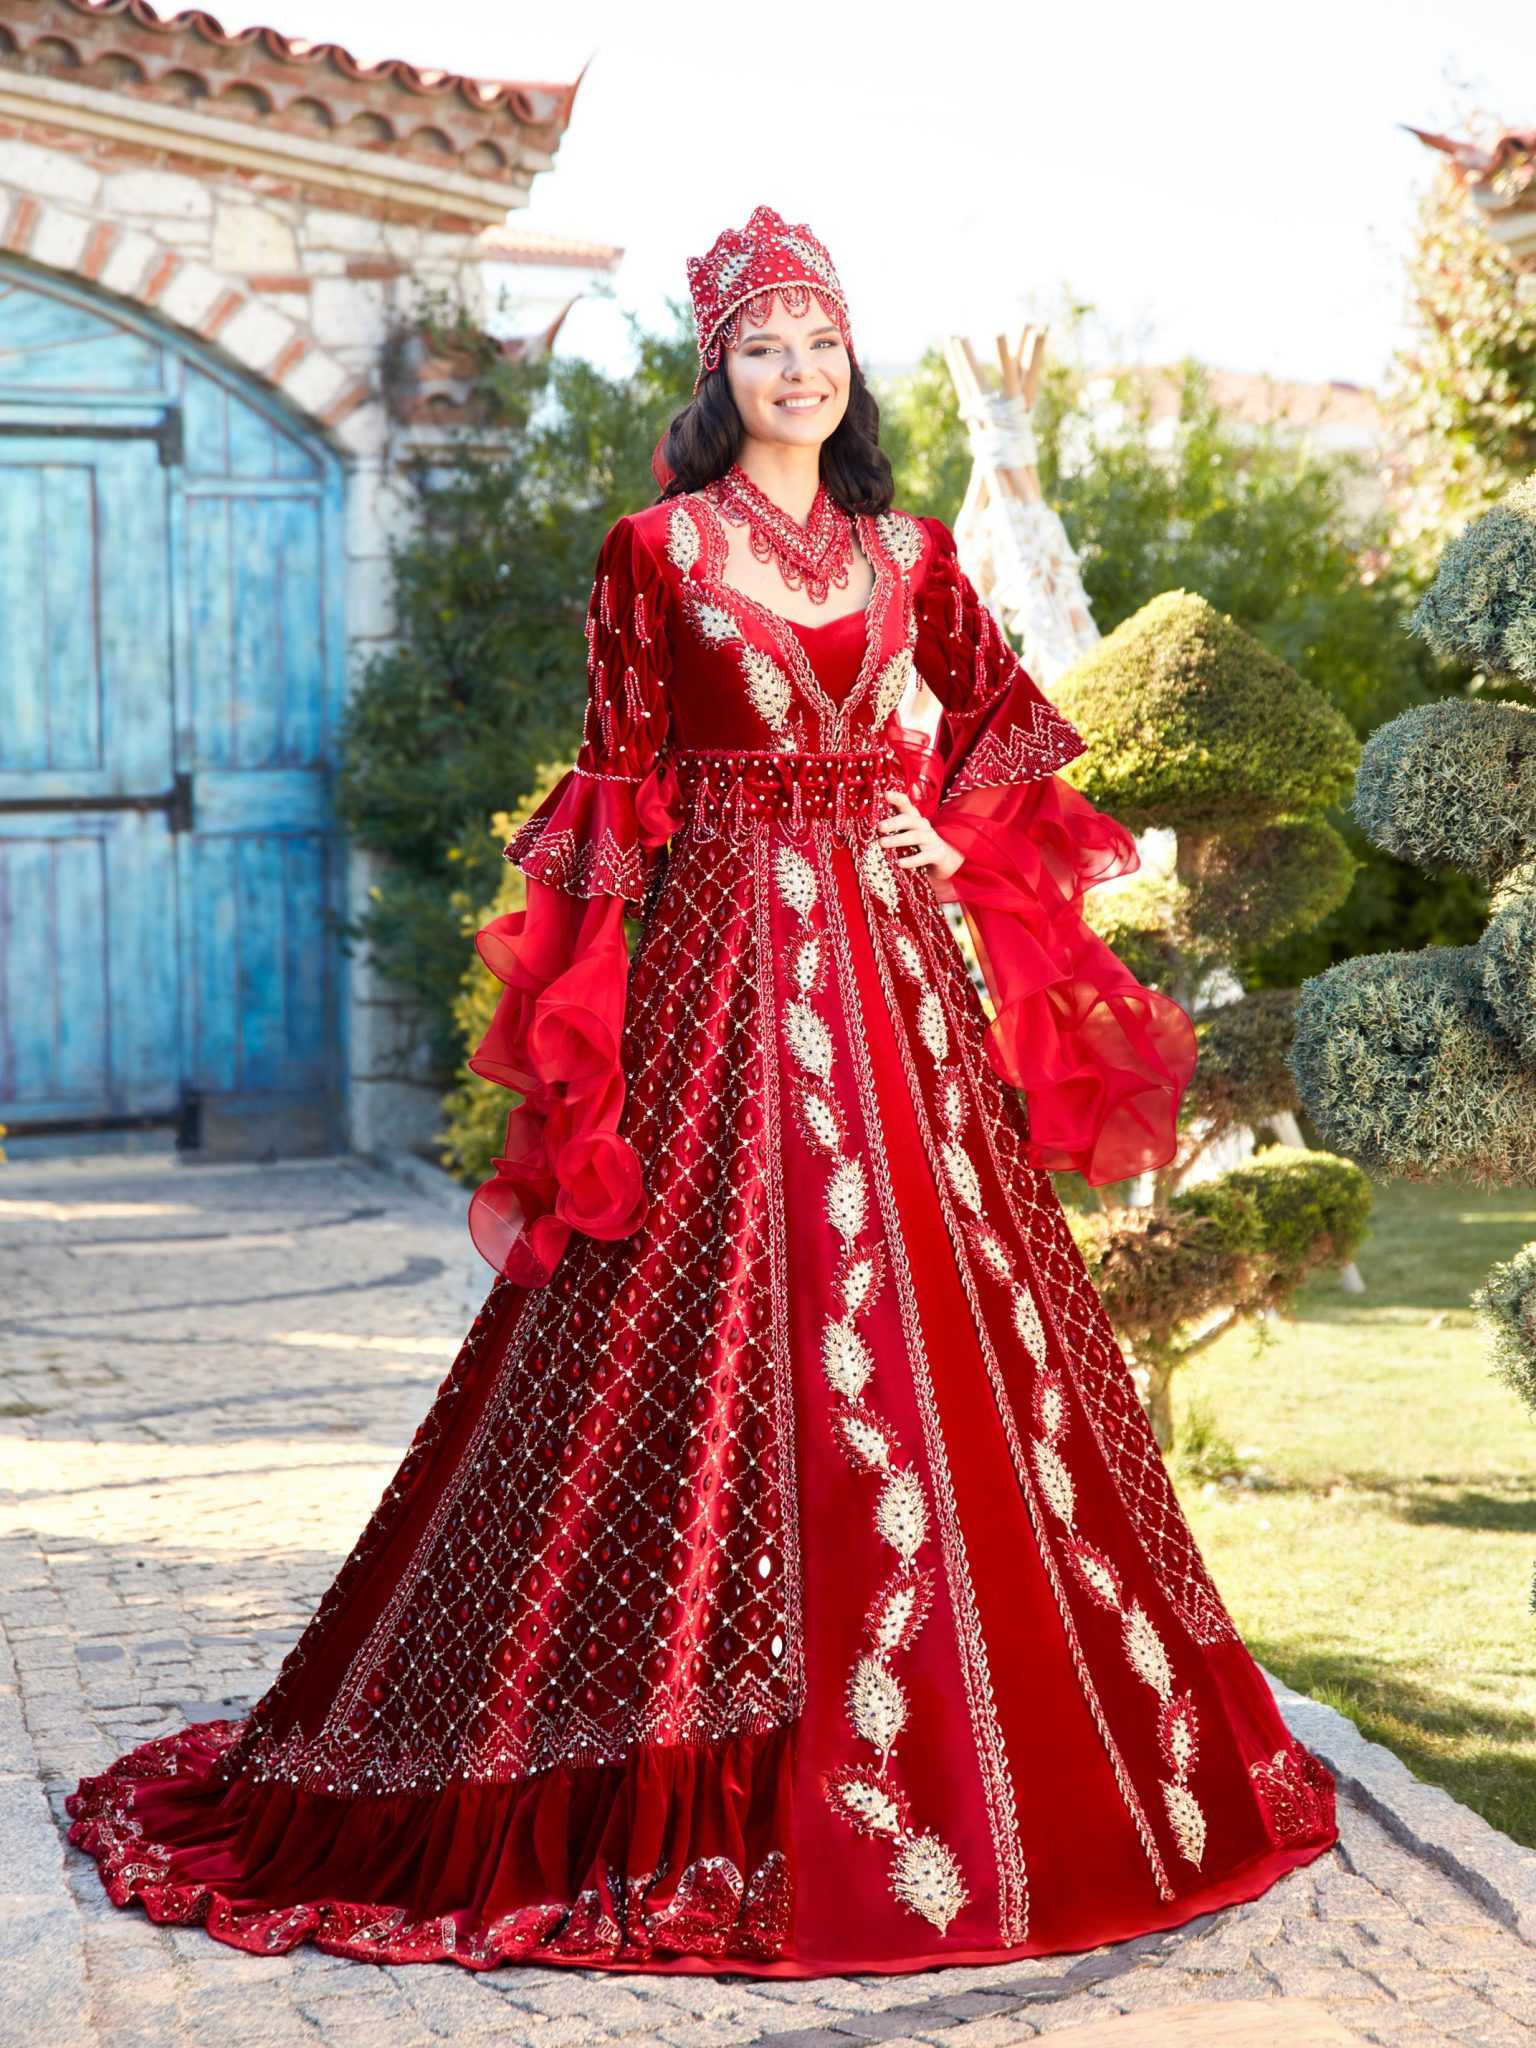 buy Beautiful Heavily Embroidered Red Velvet Long Sleeve Maxi Wedding Gown Dress online henna gowns shop